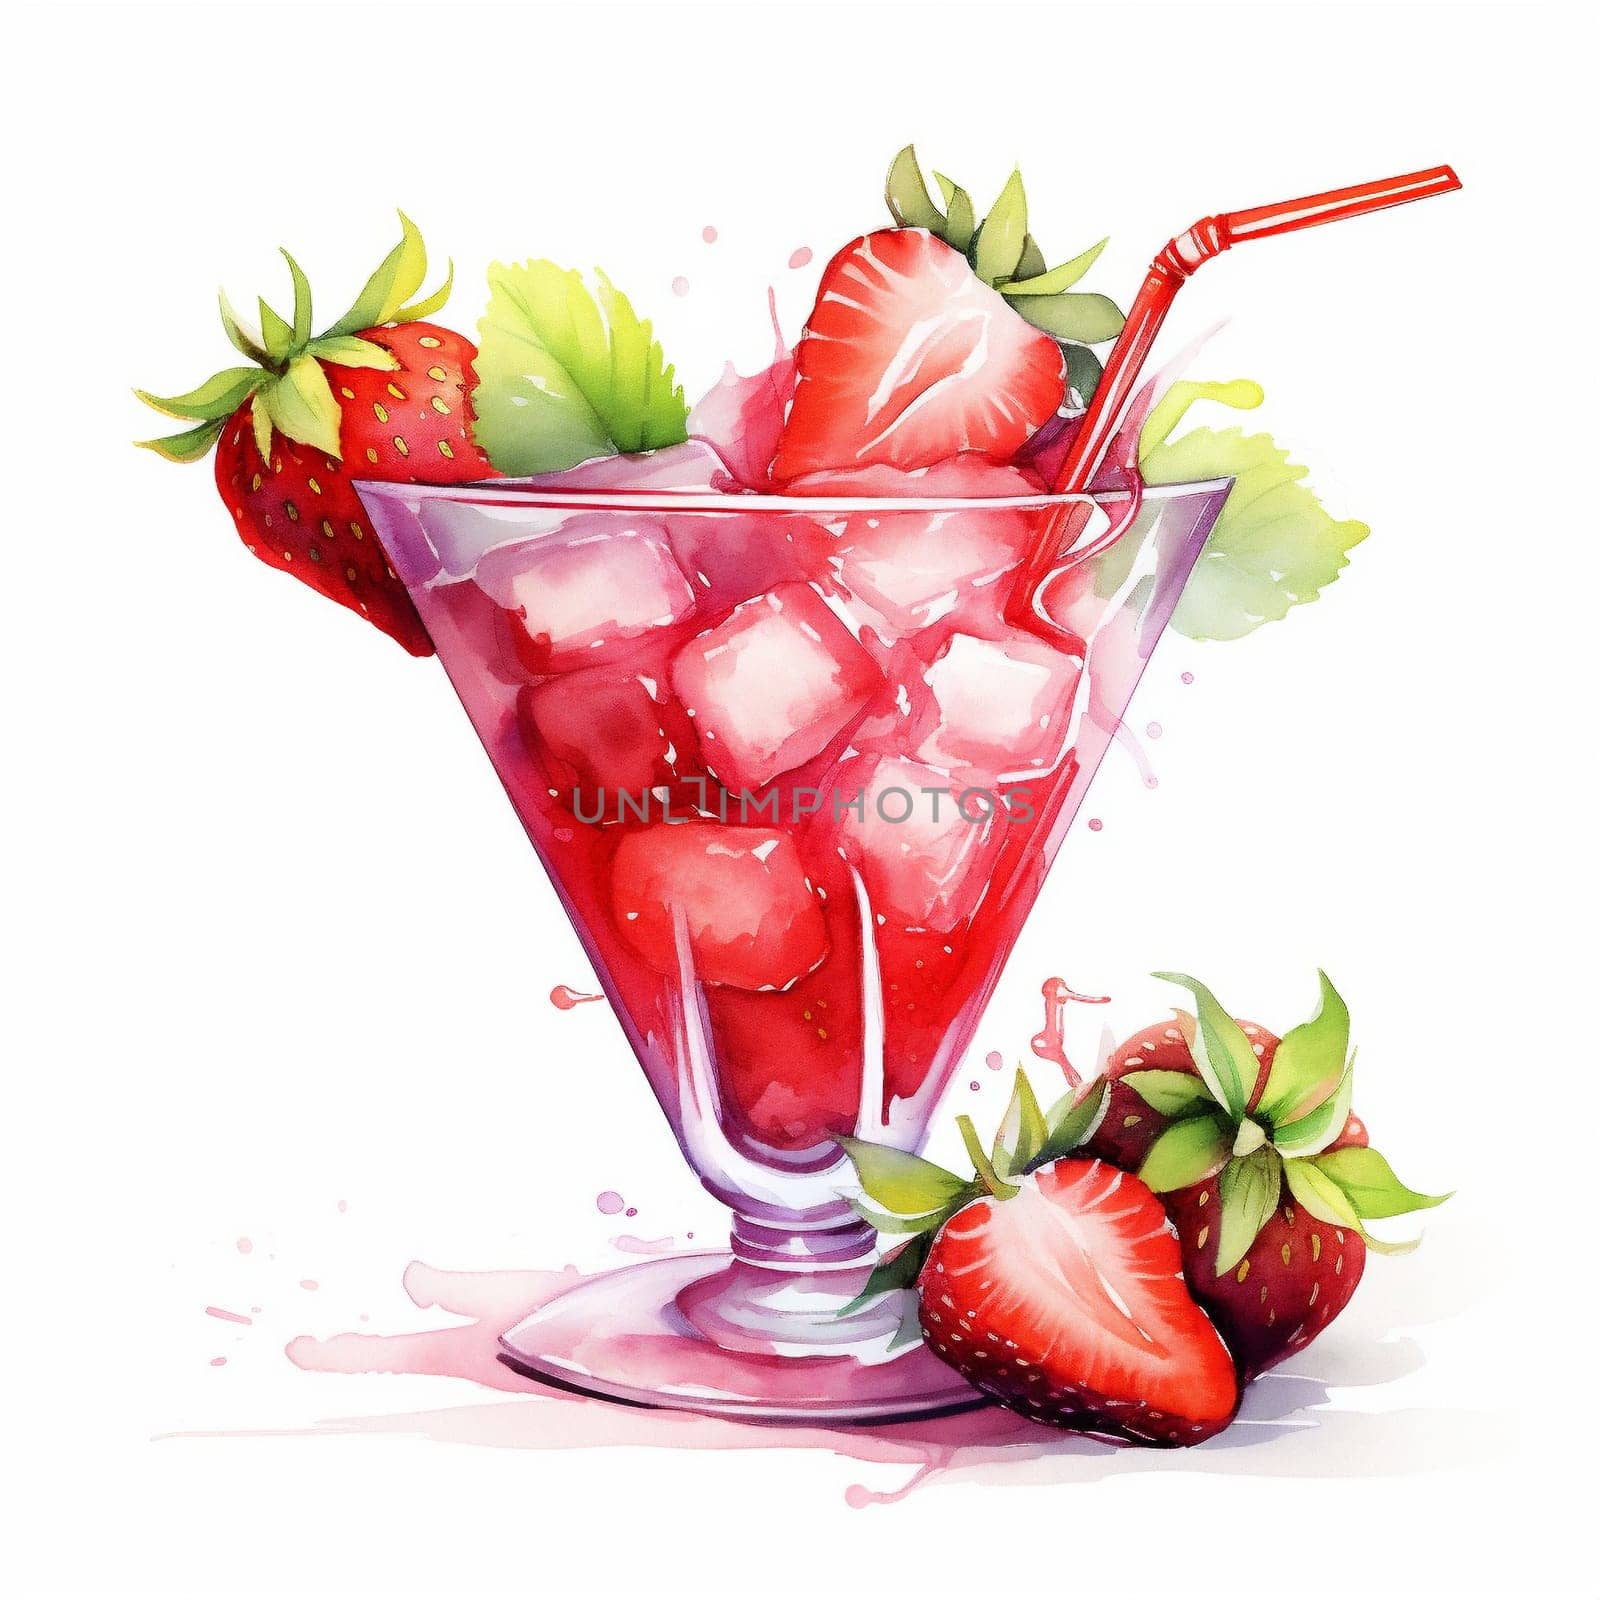 Cocktail Day with Strawberry, Ice and Mint Leaves. Hand Drawn Coctail Day with Berries Sketch on White Background.